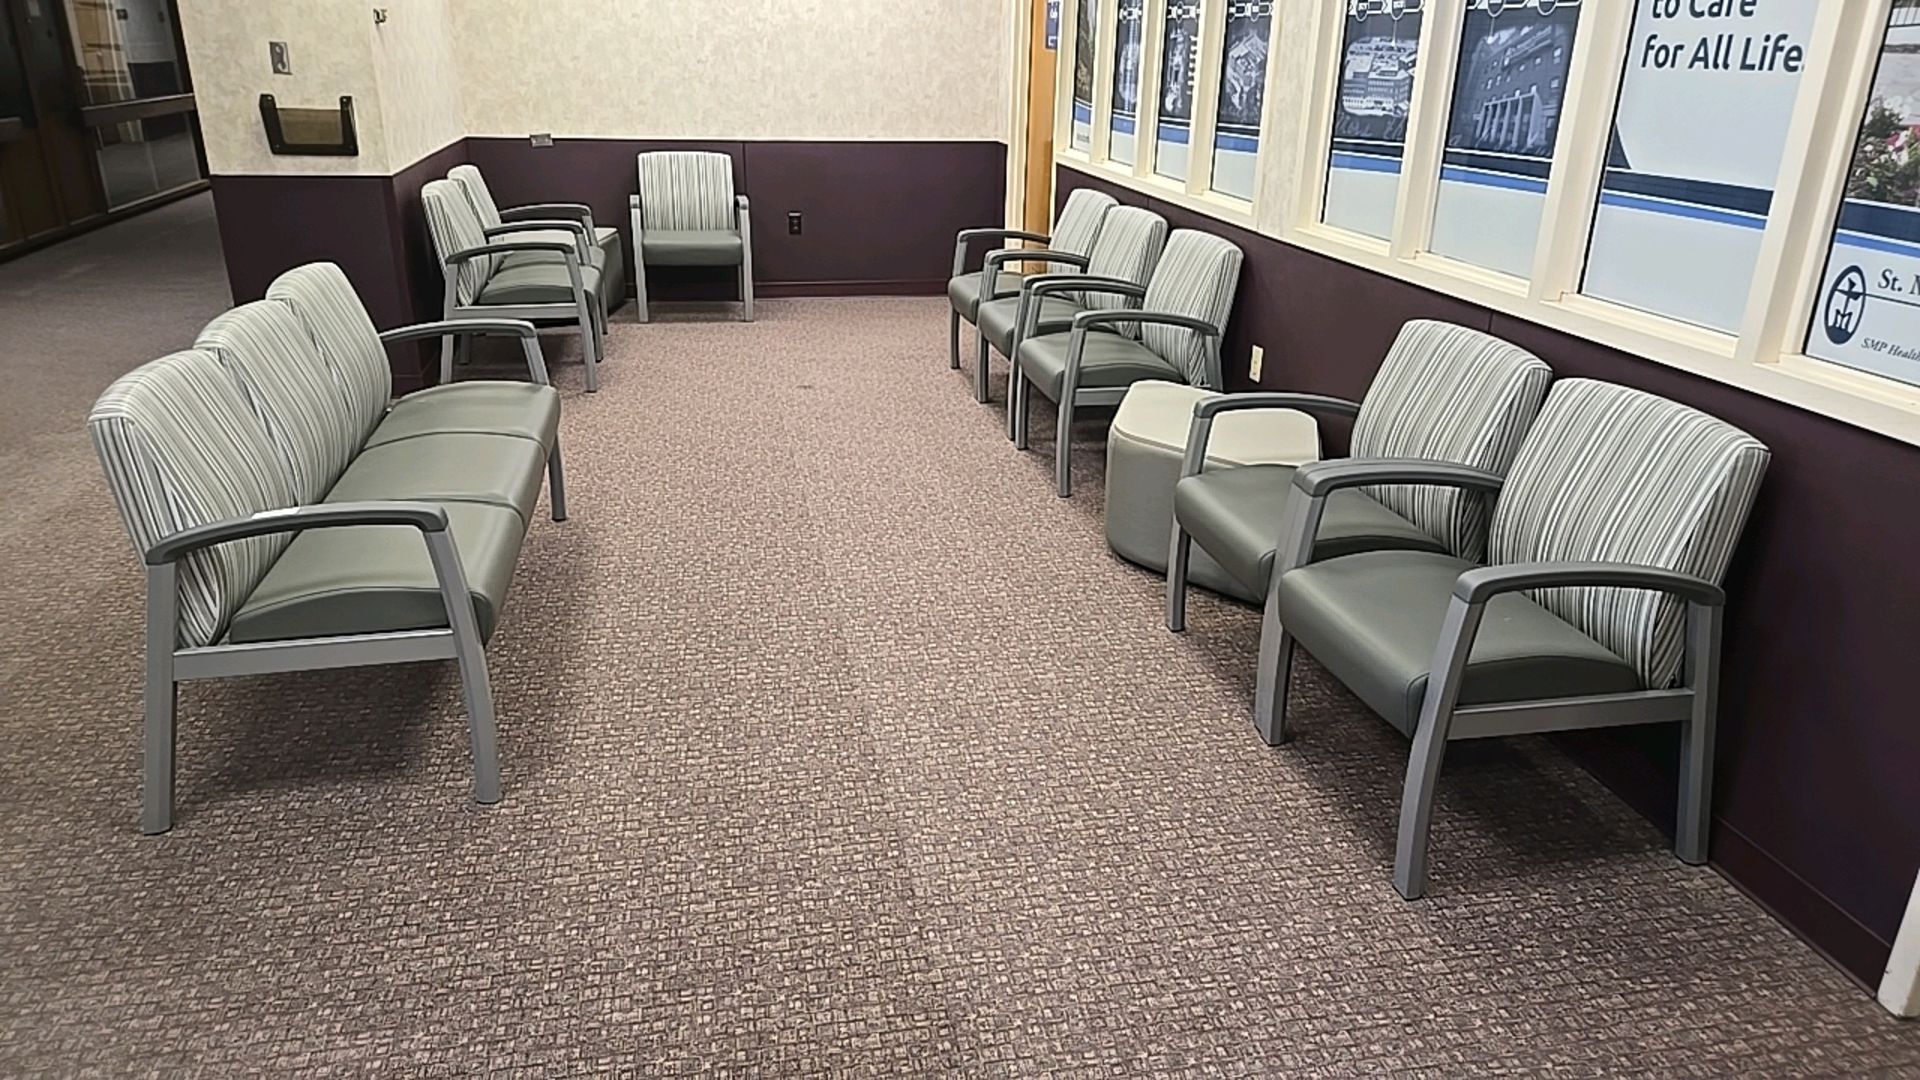 WAITING ROOM TO INCLUDE: CHAIRS, END TABLES